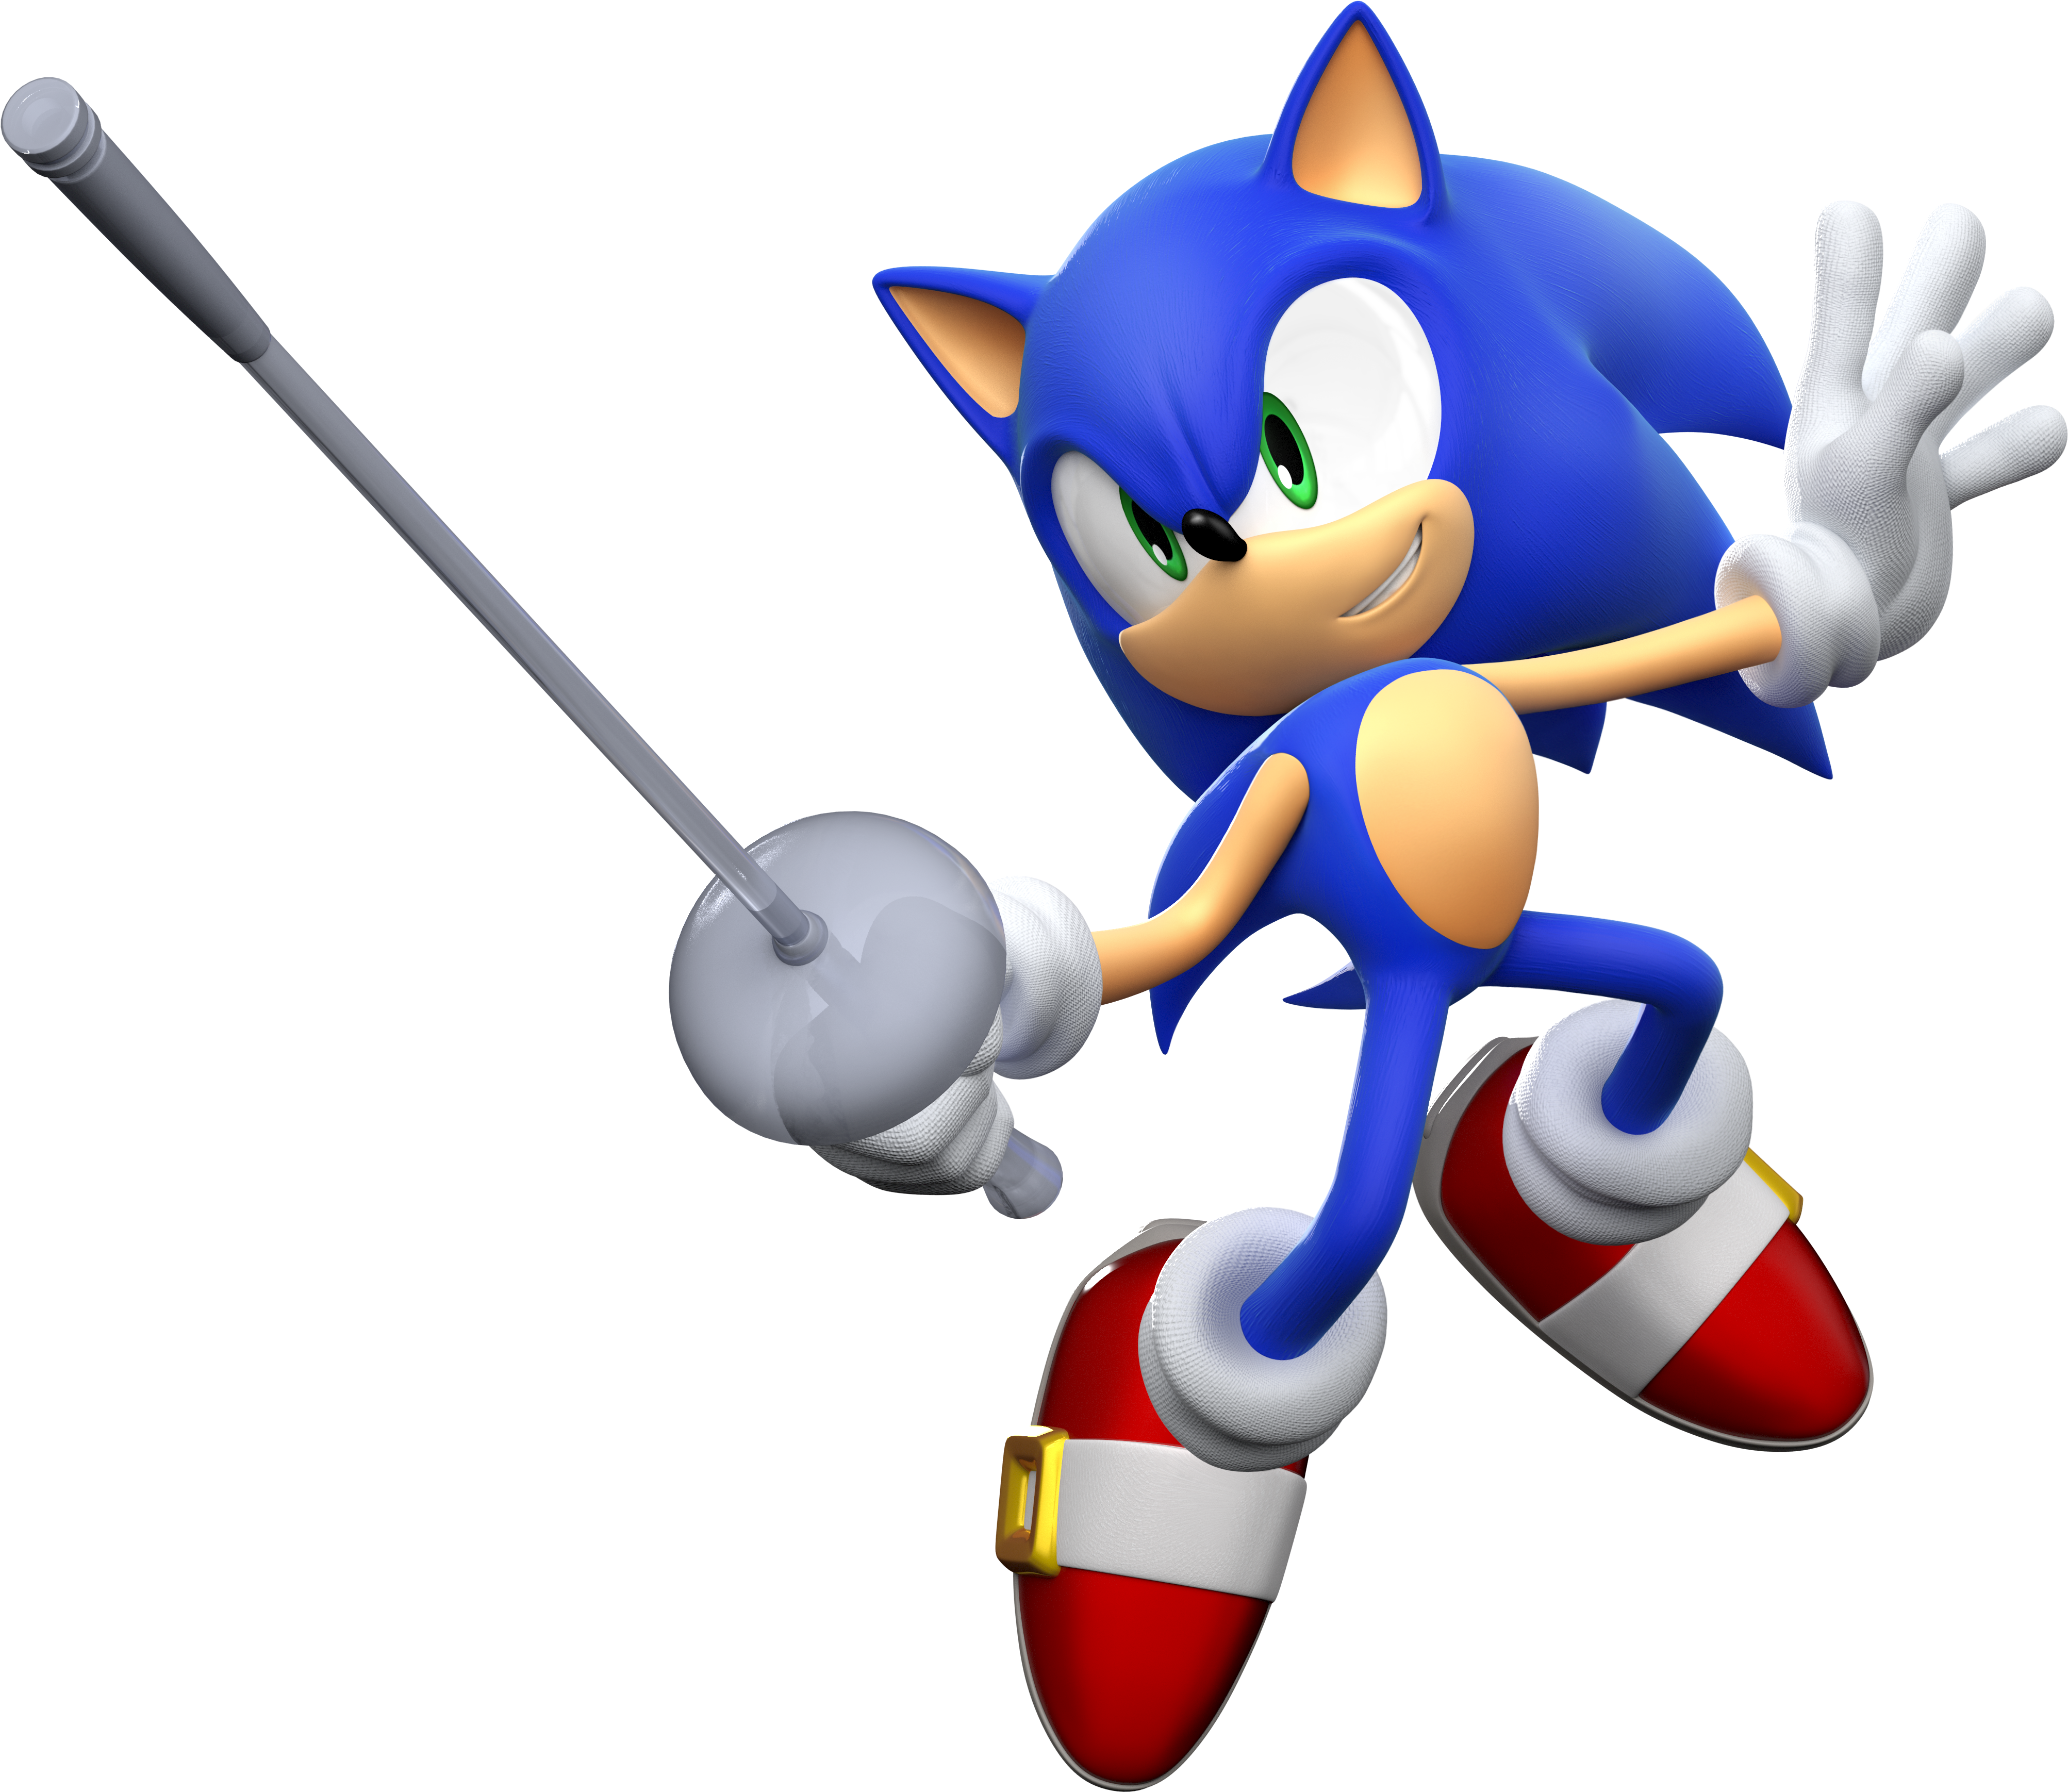 Mario & Sonic Sonic - Mario And Sonic At The London 2012 Olympic Games Sonic (4500x4500)